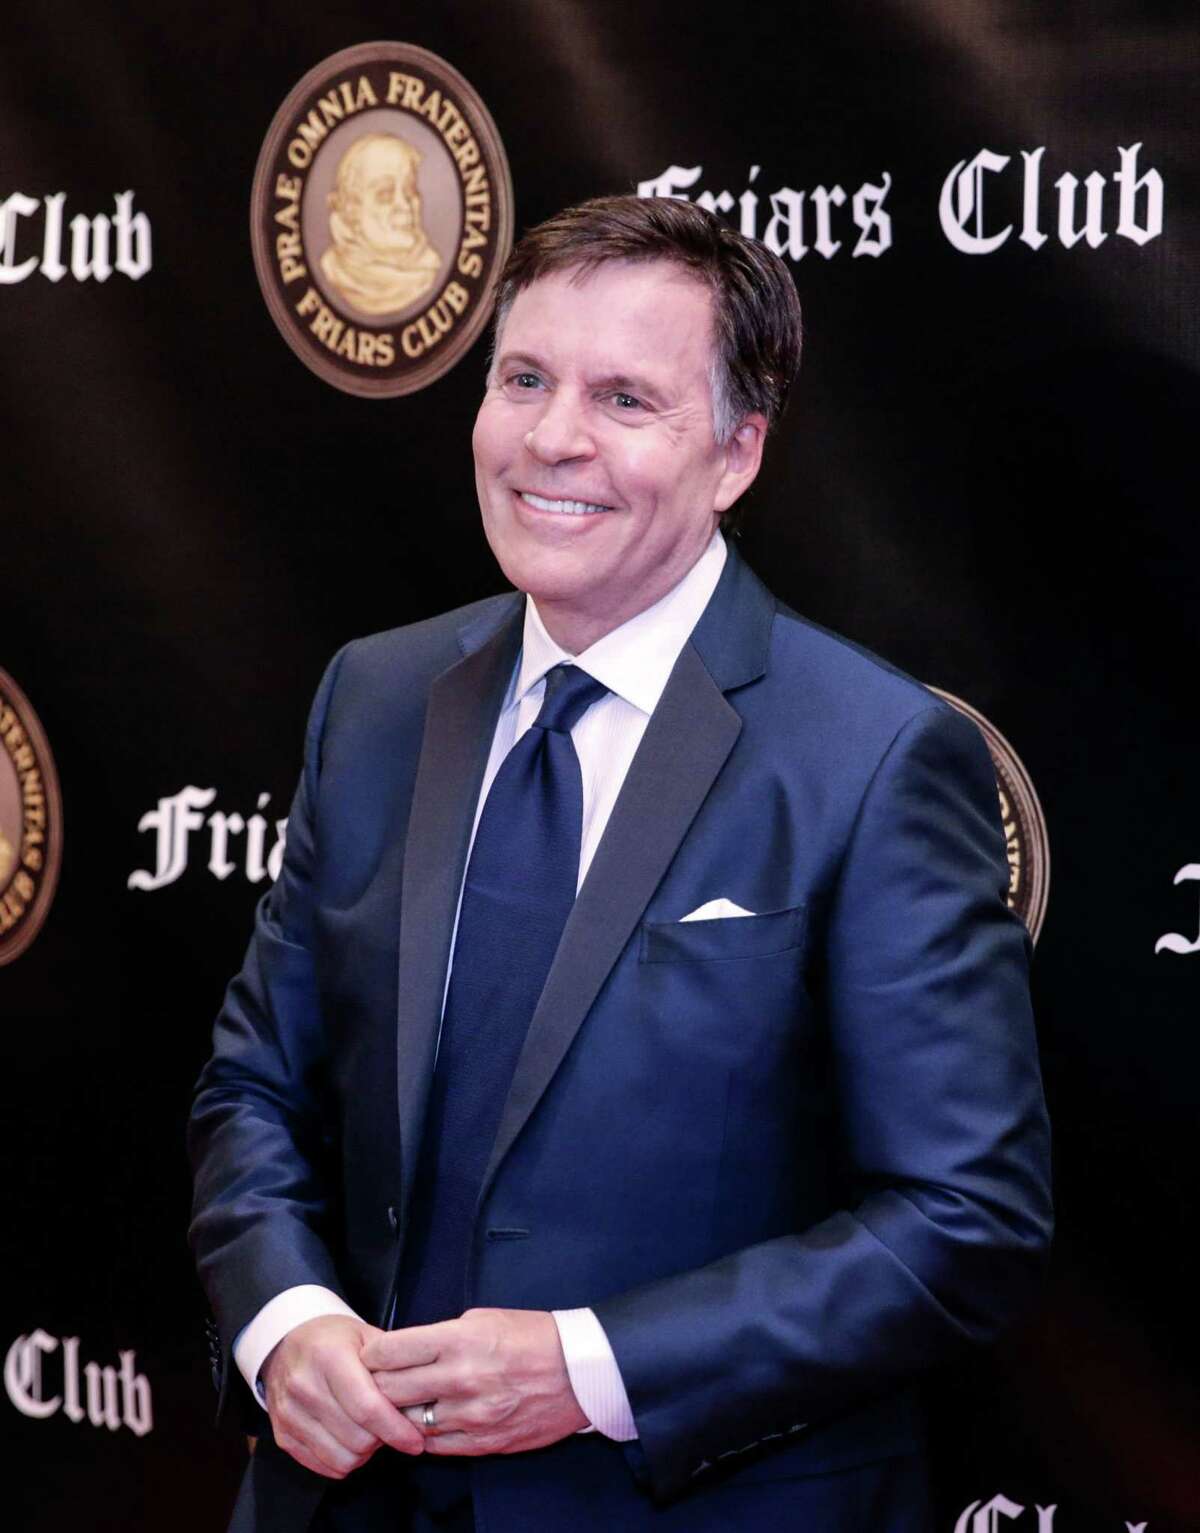 Sportscaster Bob Costas is among the best at his craft as major league baseball’s consummate play-by-play man on the MLB Network.